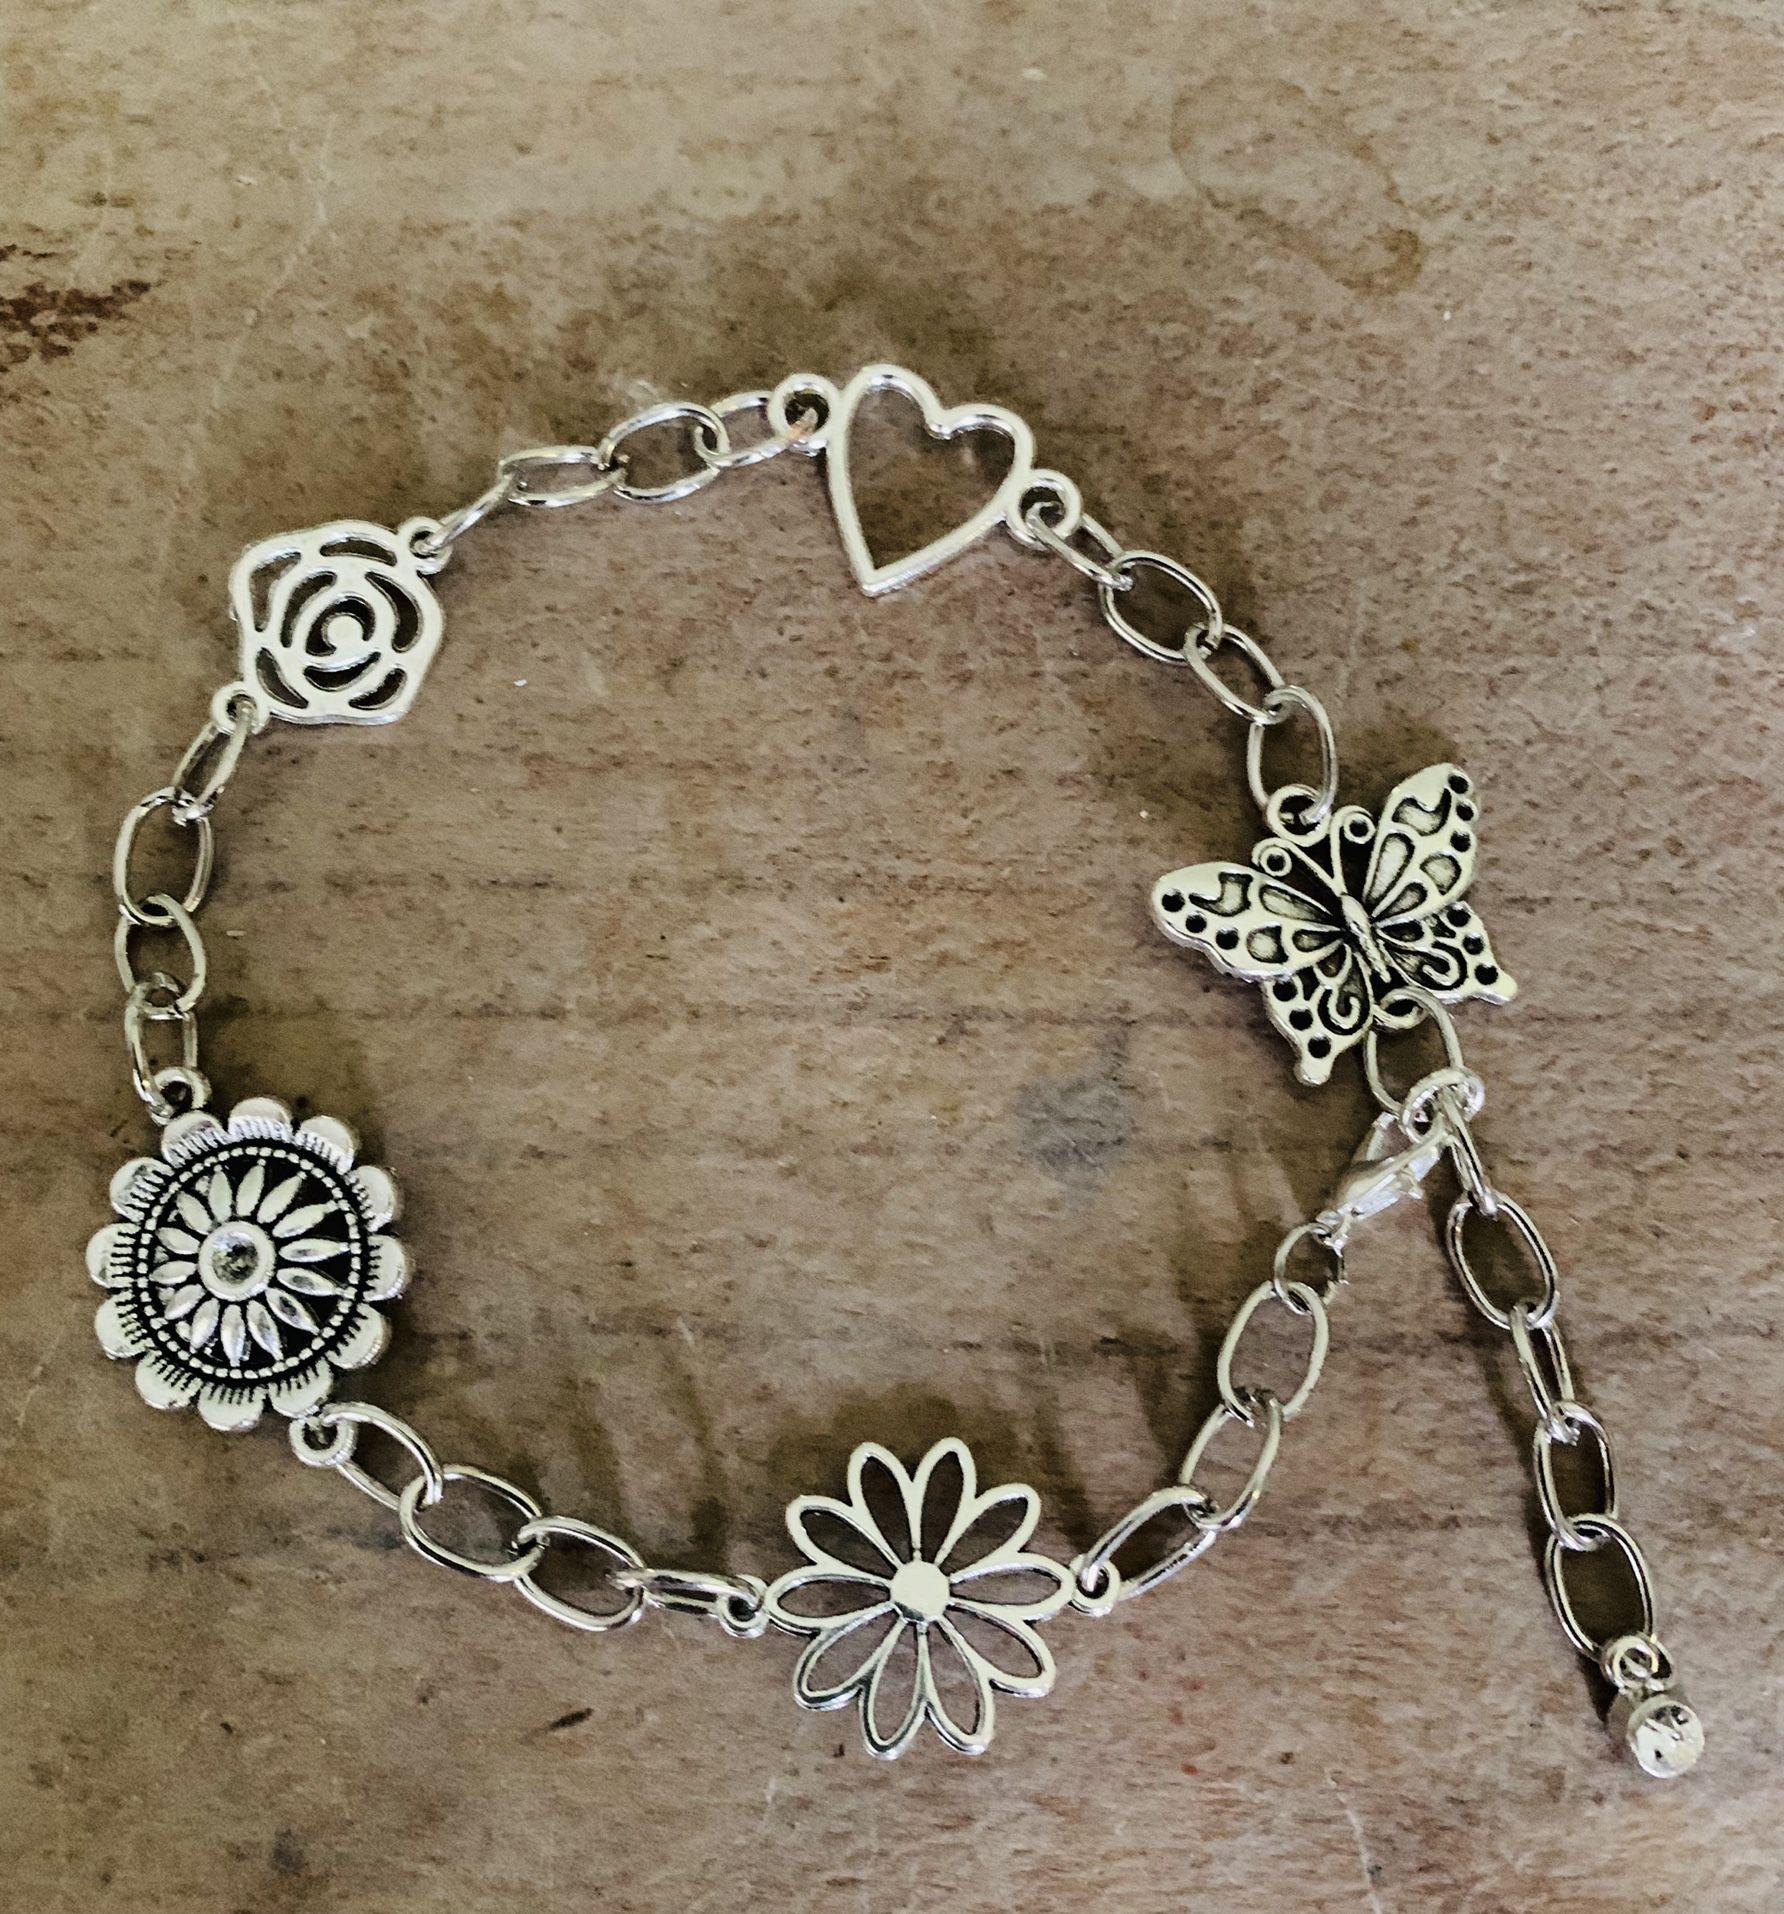  *Open the bloom of your heart* Anklet